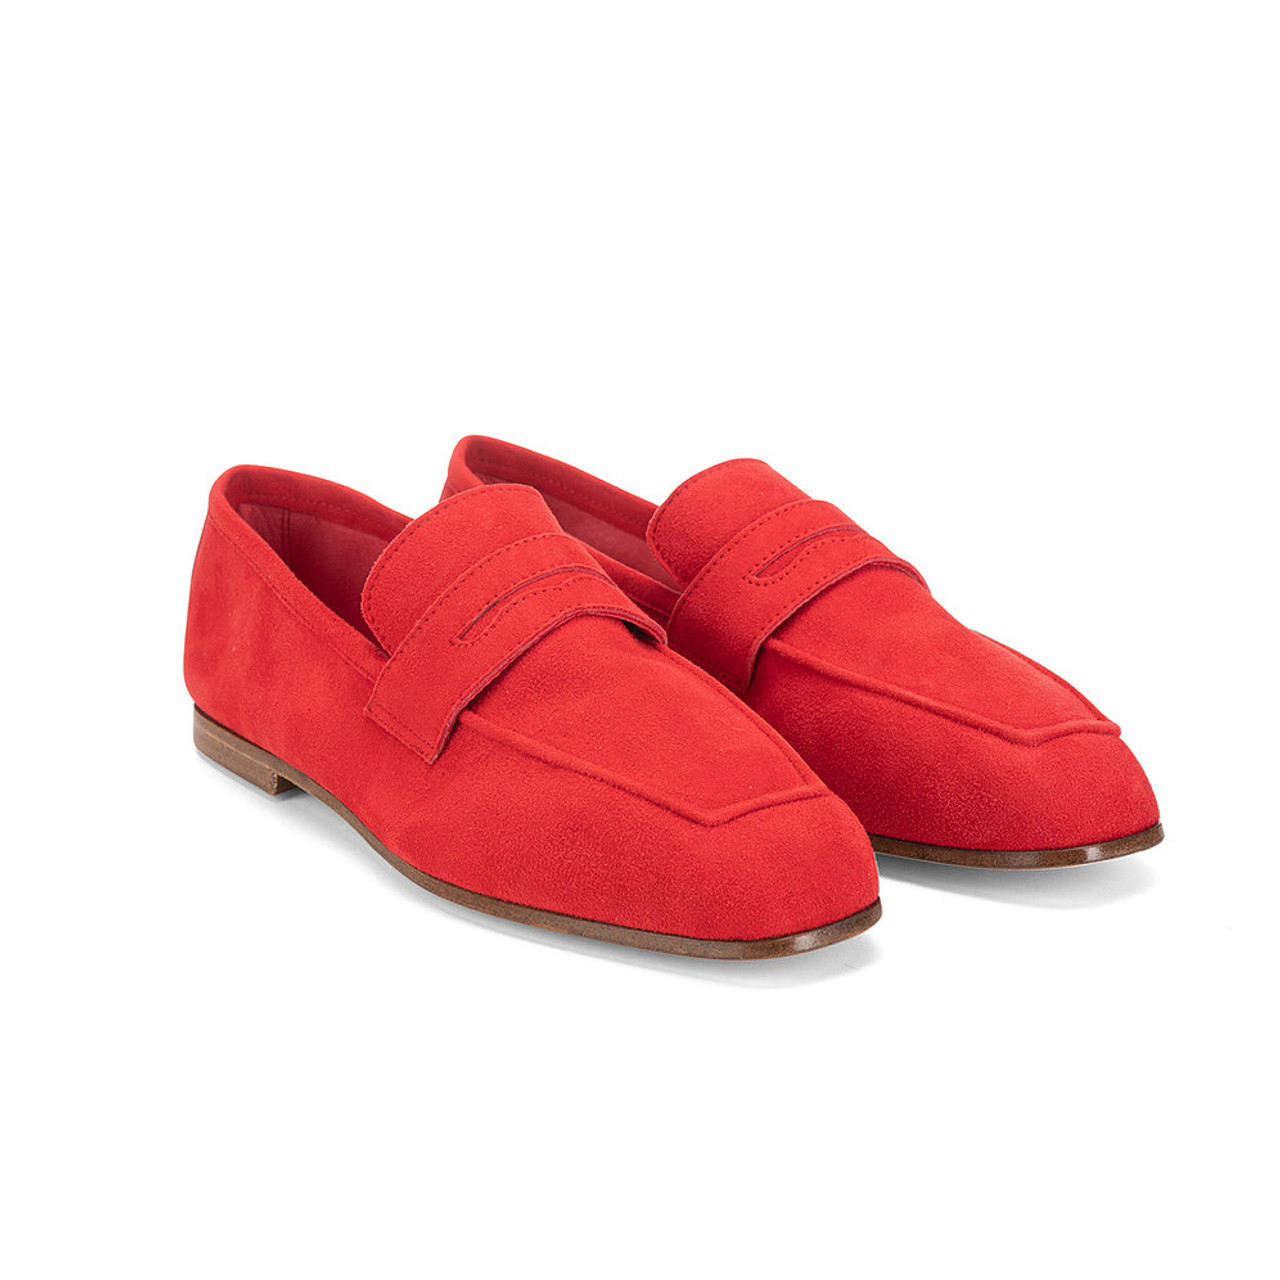 Sophique Milano Essenziale Classic Suede Loafer in Red